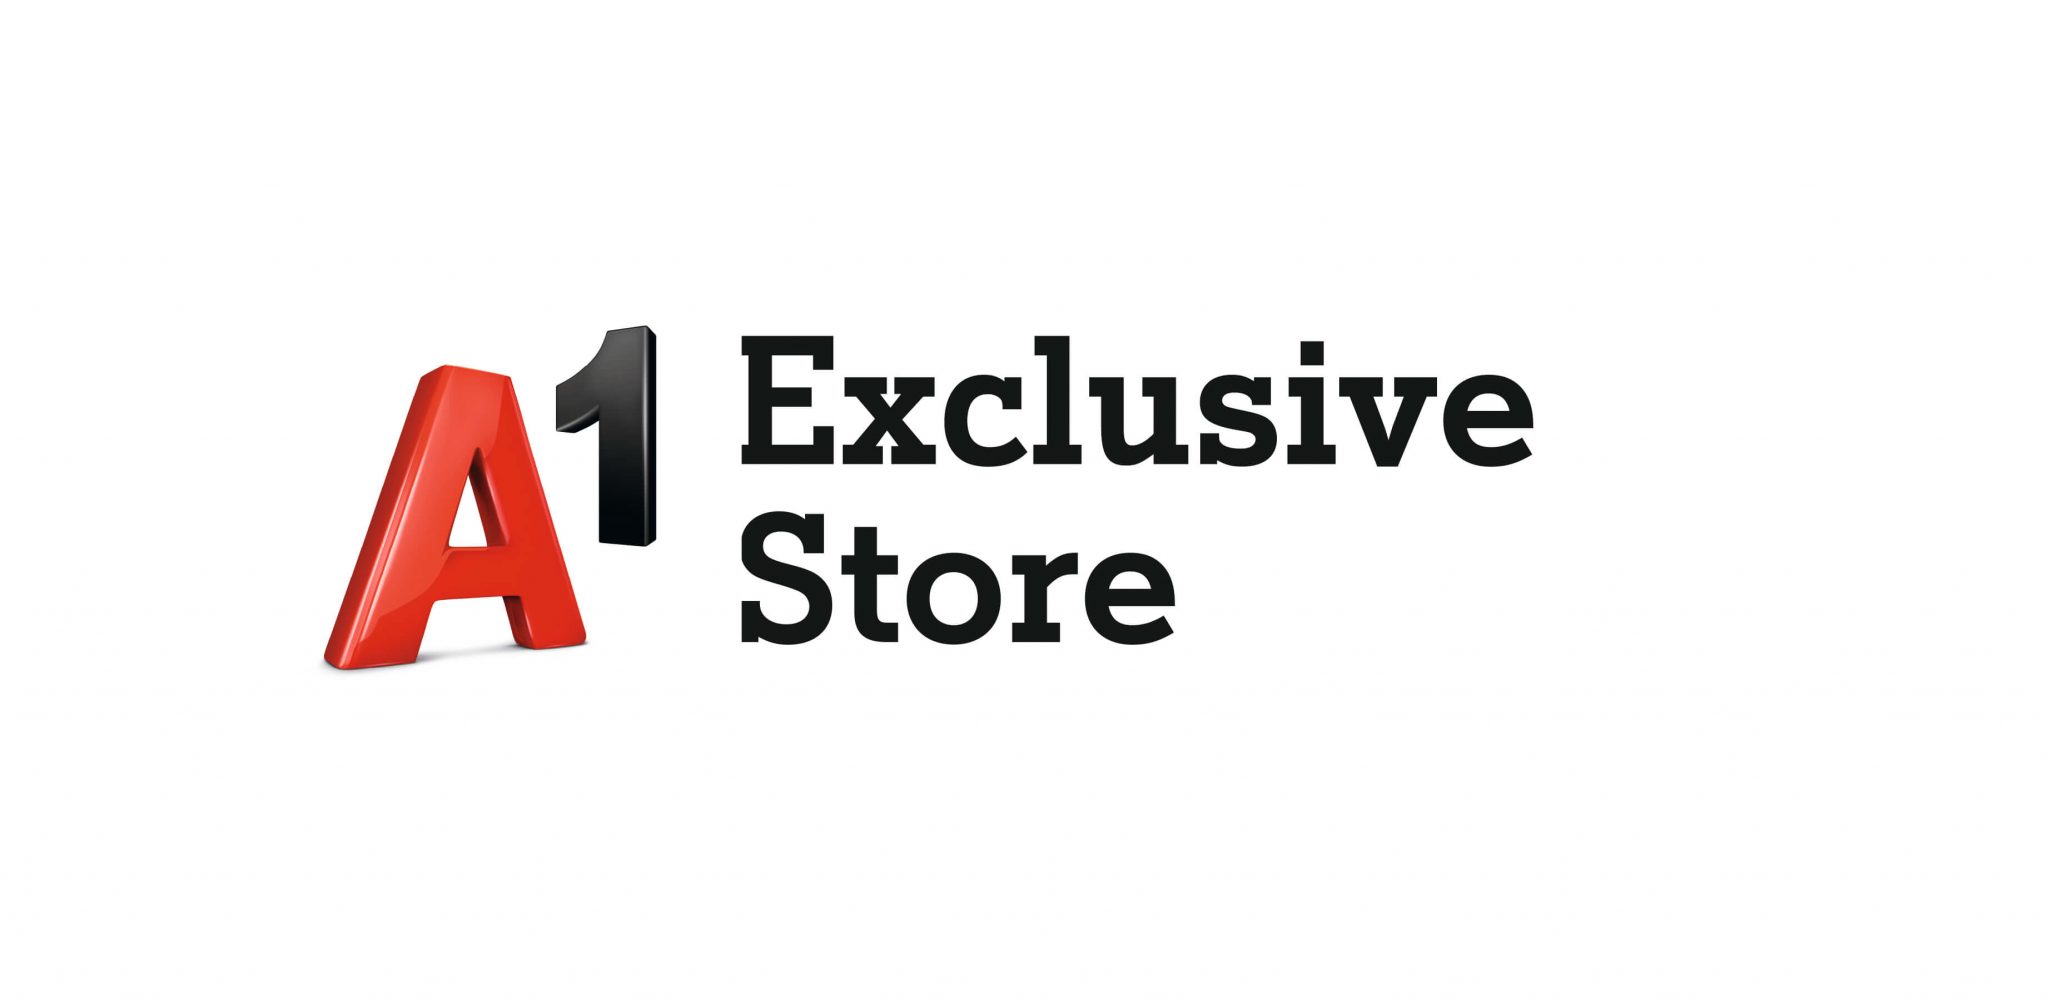 A1 Exclusive Store Logo